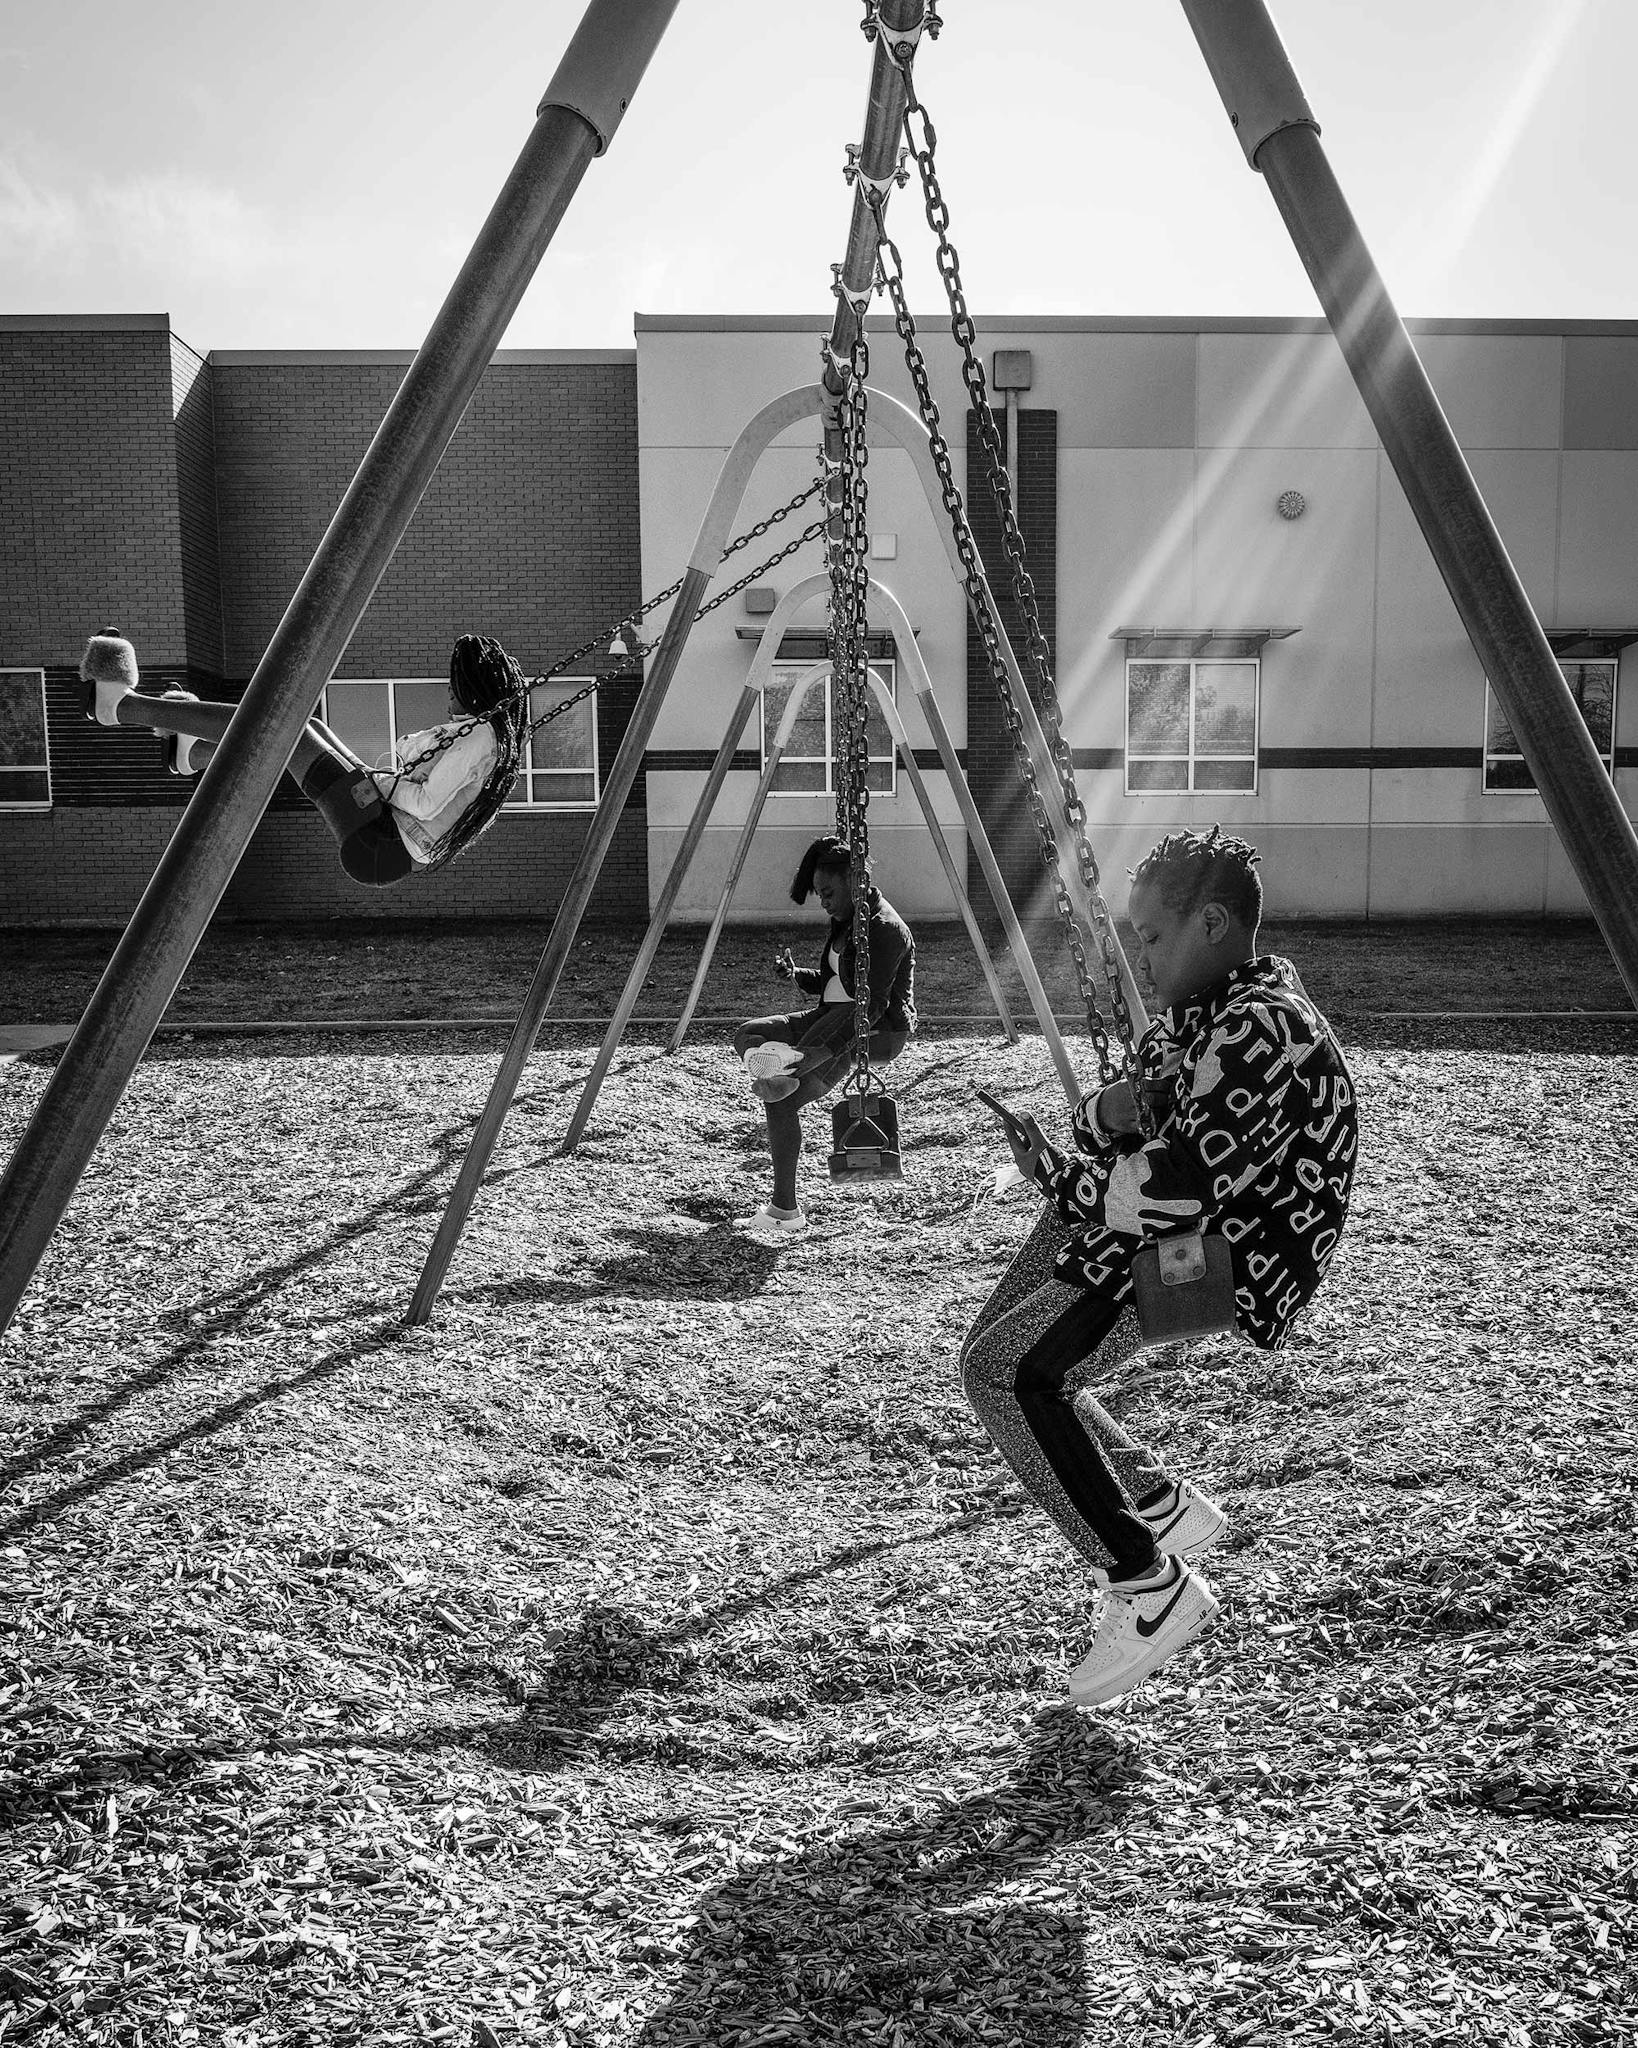 Johnson’s son Cavier, eleven, swings on a playground behind his elementary school, across the street from the Dallas apartment complex where he lives.